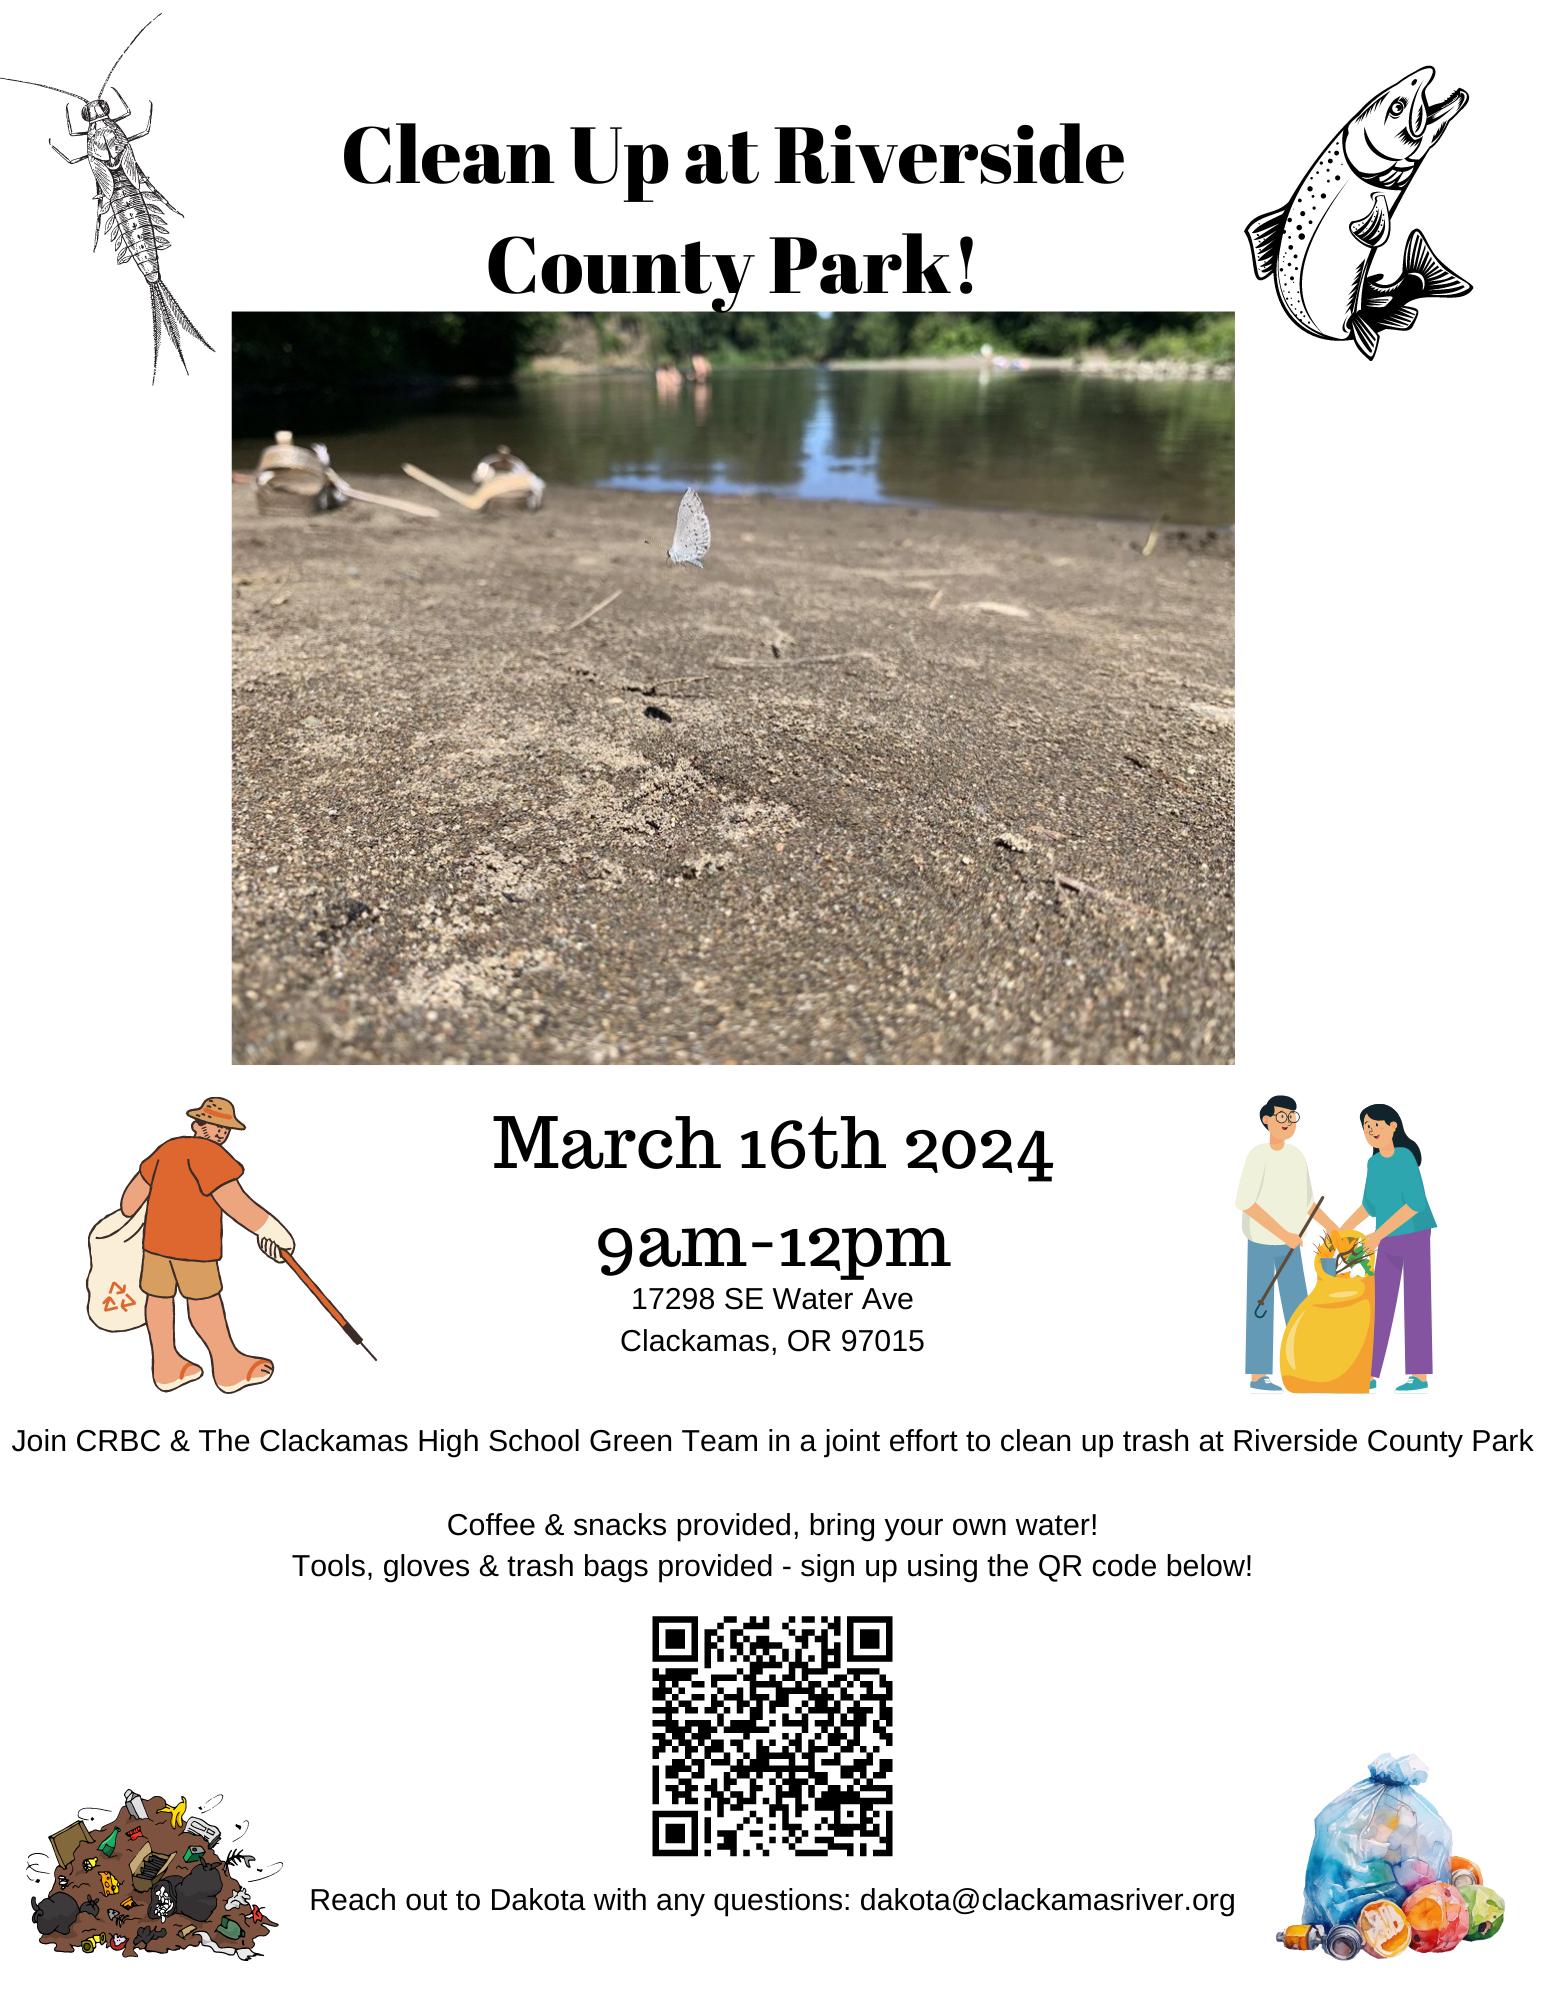 Clean Up at Riverside County Park!